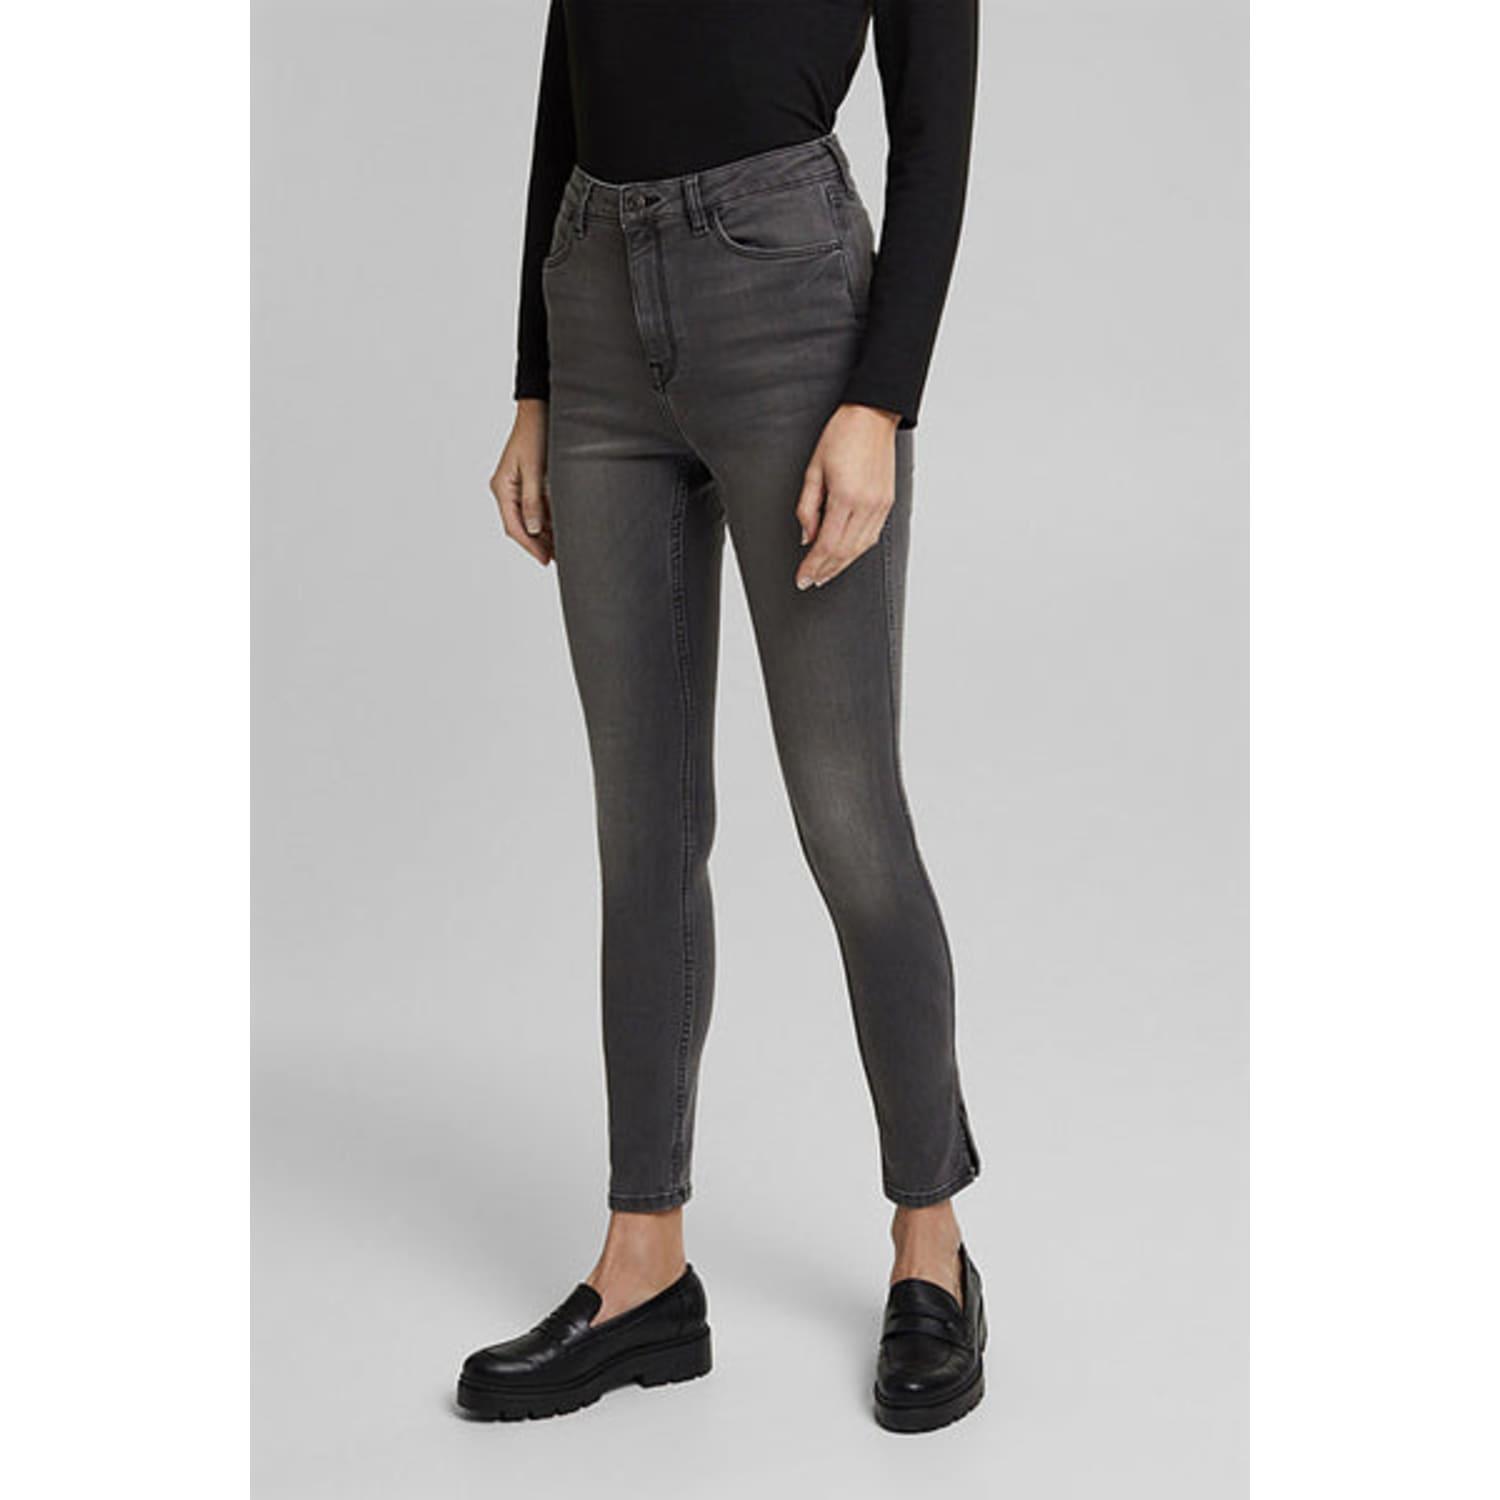 Esprit Grey Medium Washed High Waisted Recycled Skinny Jeans in Black | Lyst